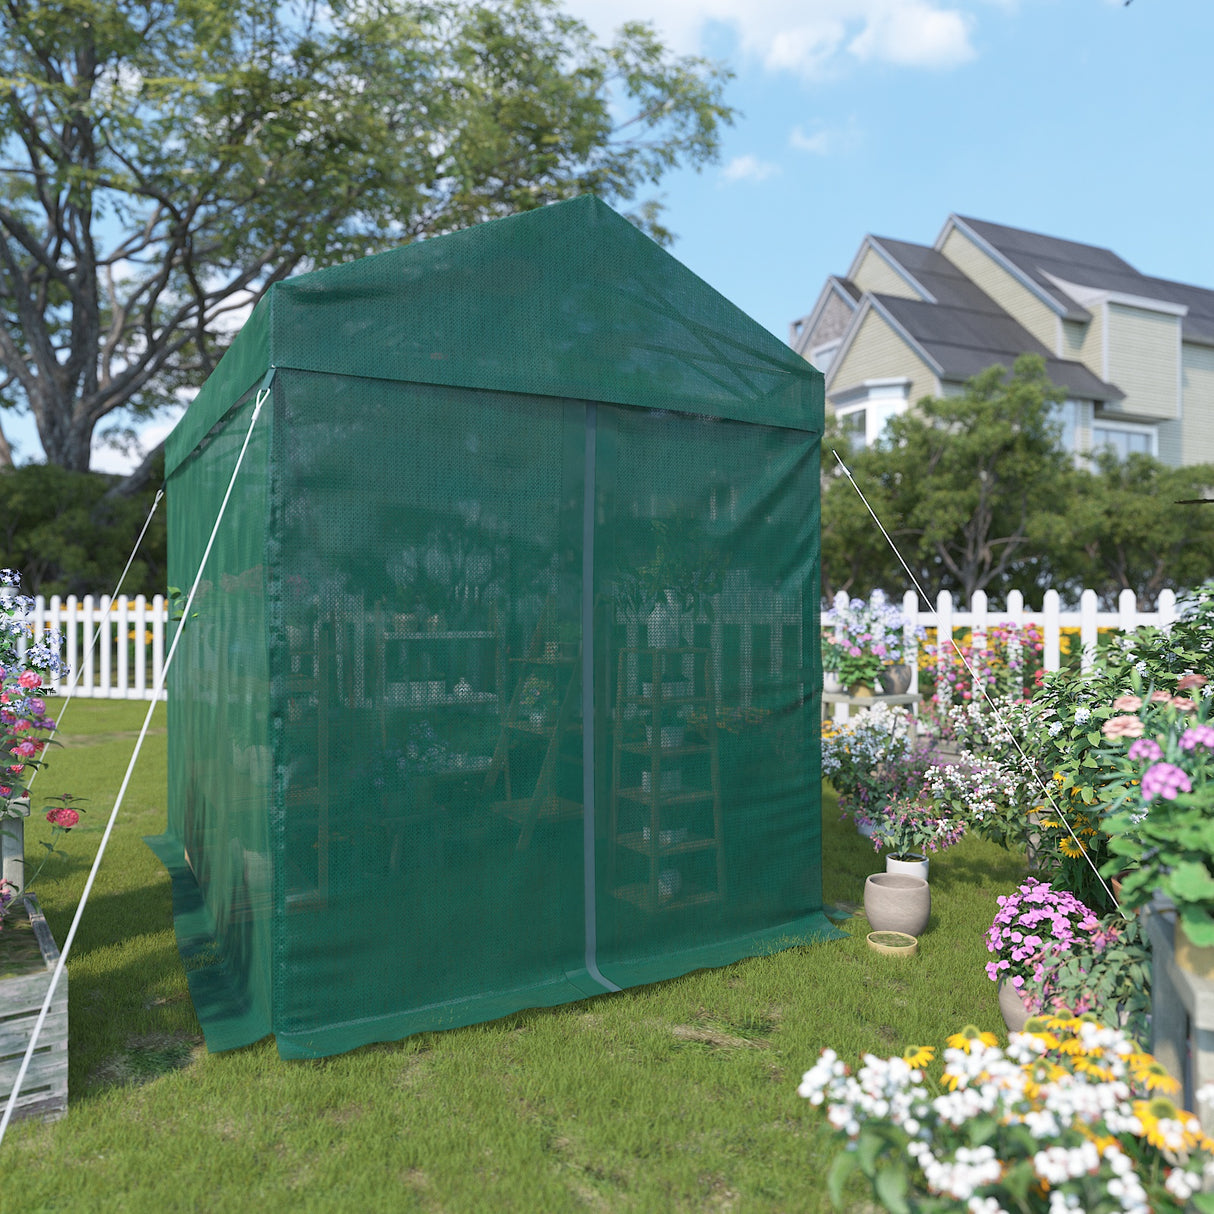 EAGLE PEAK 8x6 Portable Walk-in Mesh Cover Greenhouse with Shade Cloth 70% UV-Resistance